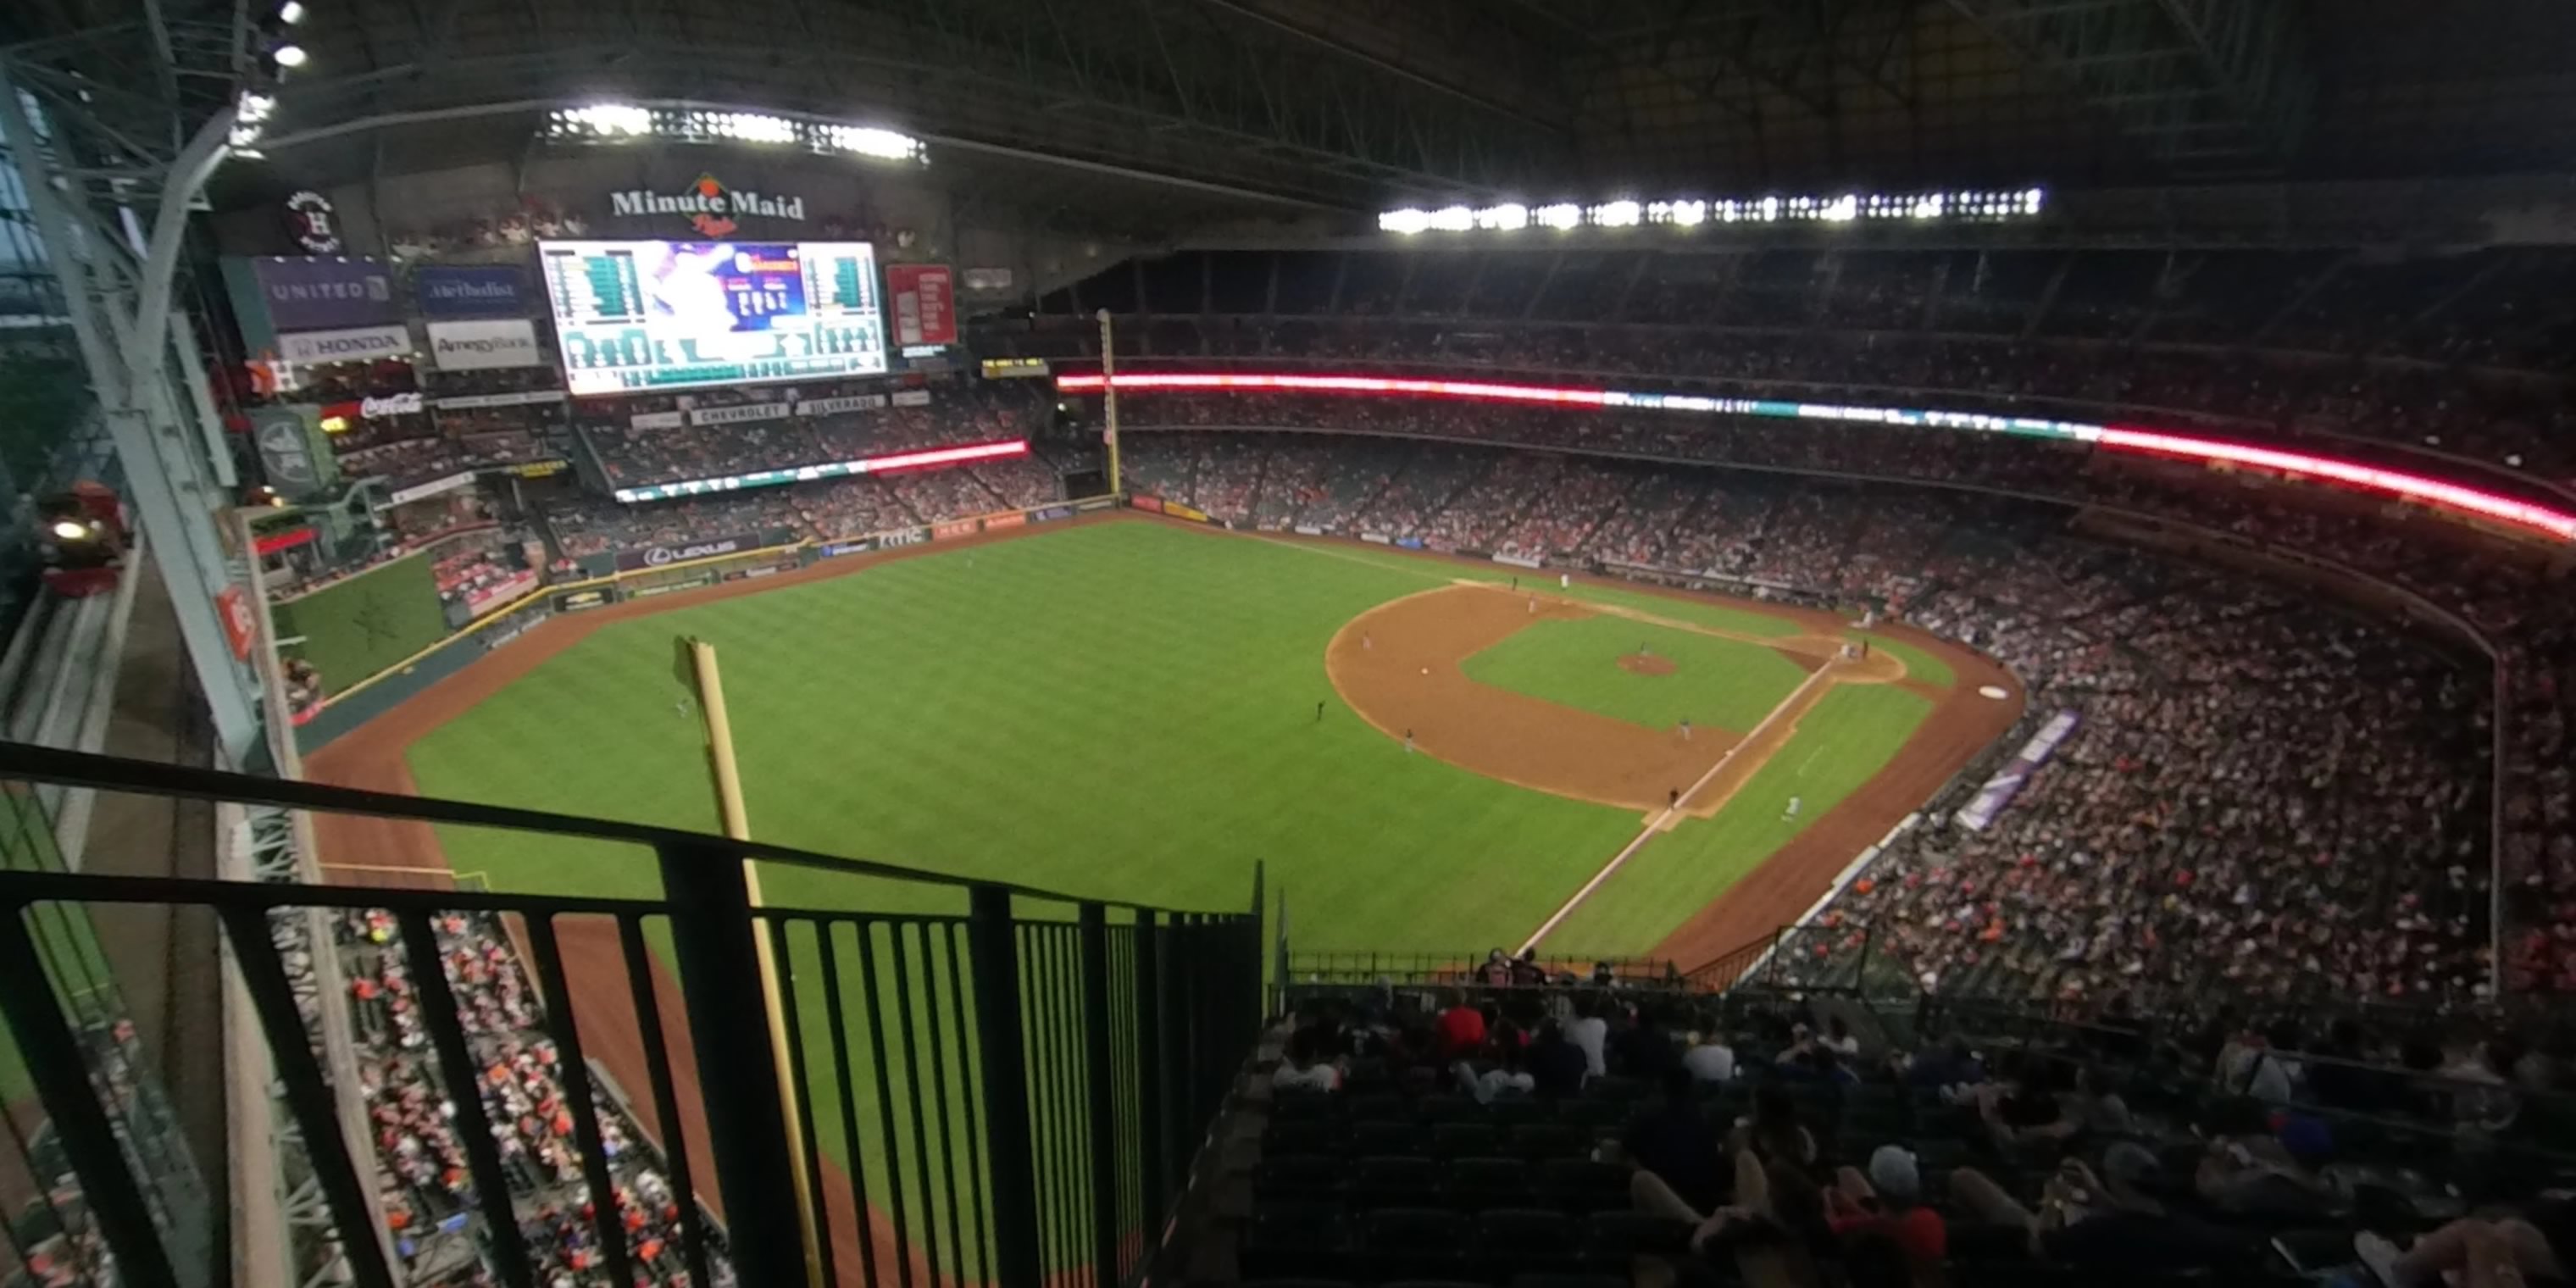 Section 405 at Minute Maid Park 